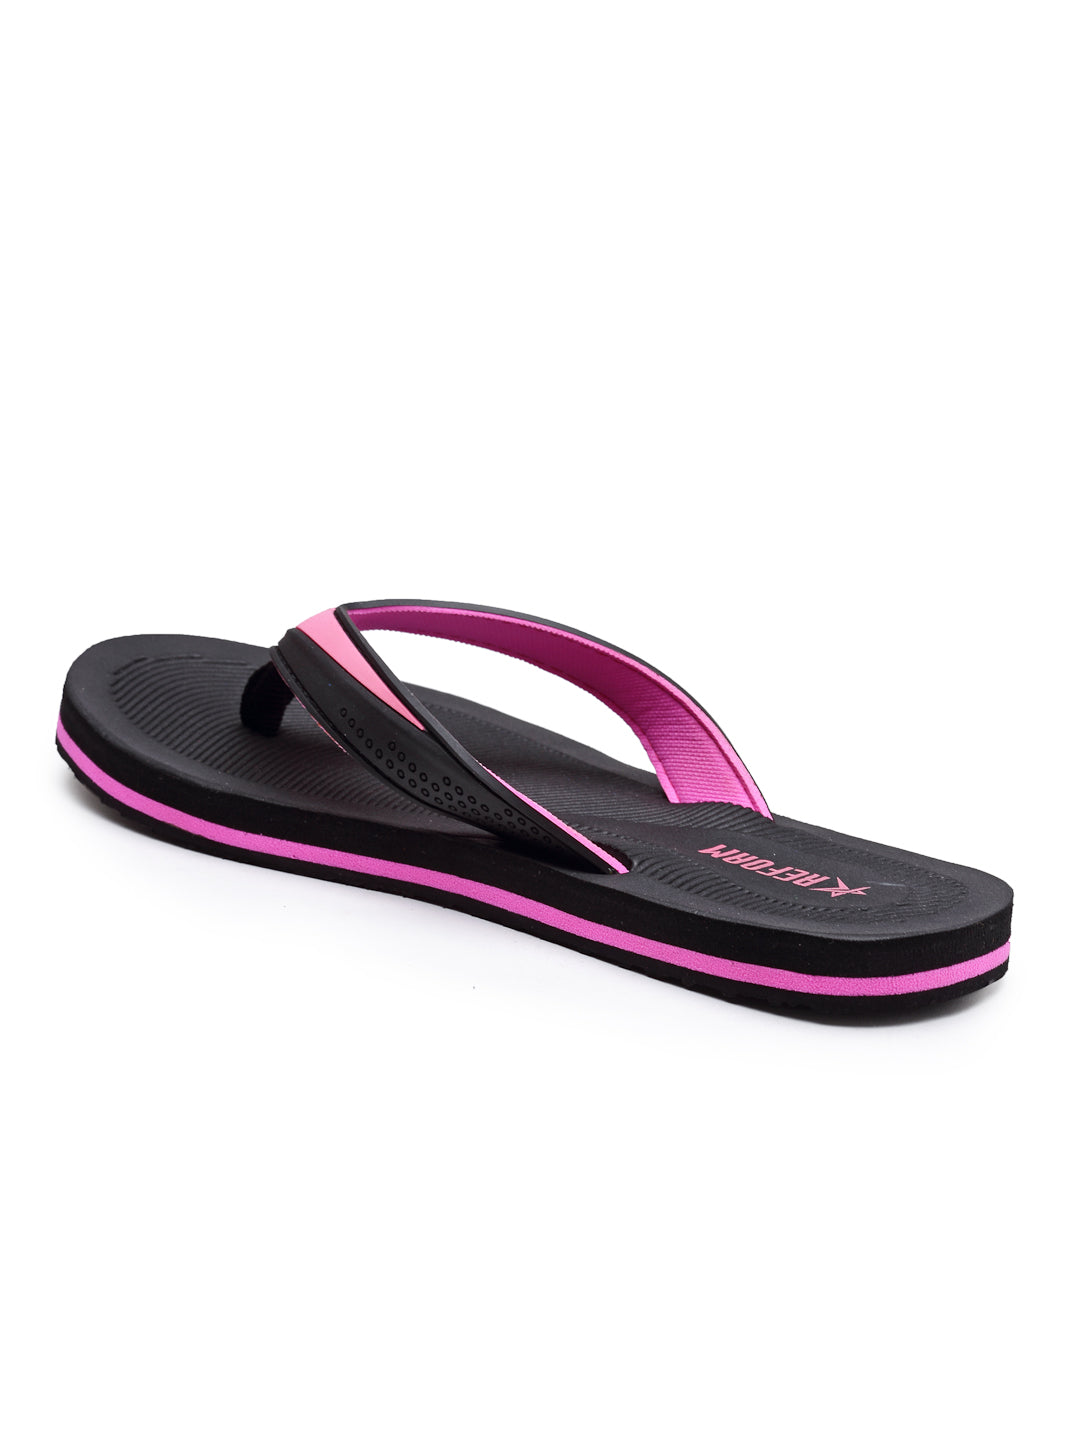 Dark Grey & Pink Solid Rubber Slip On Casual Slippers For Women